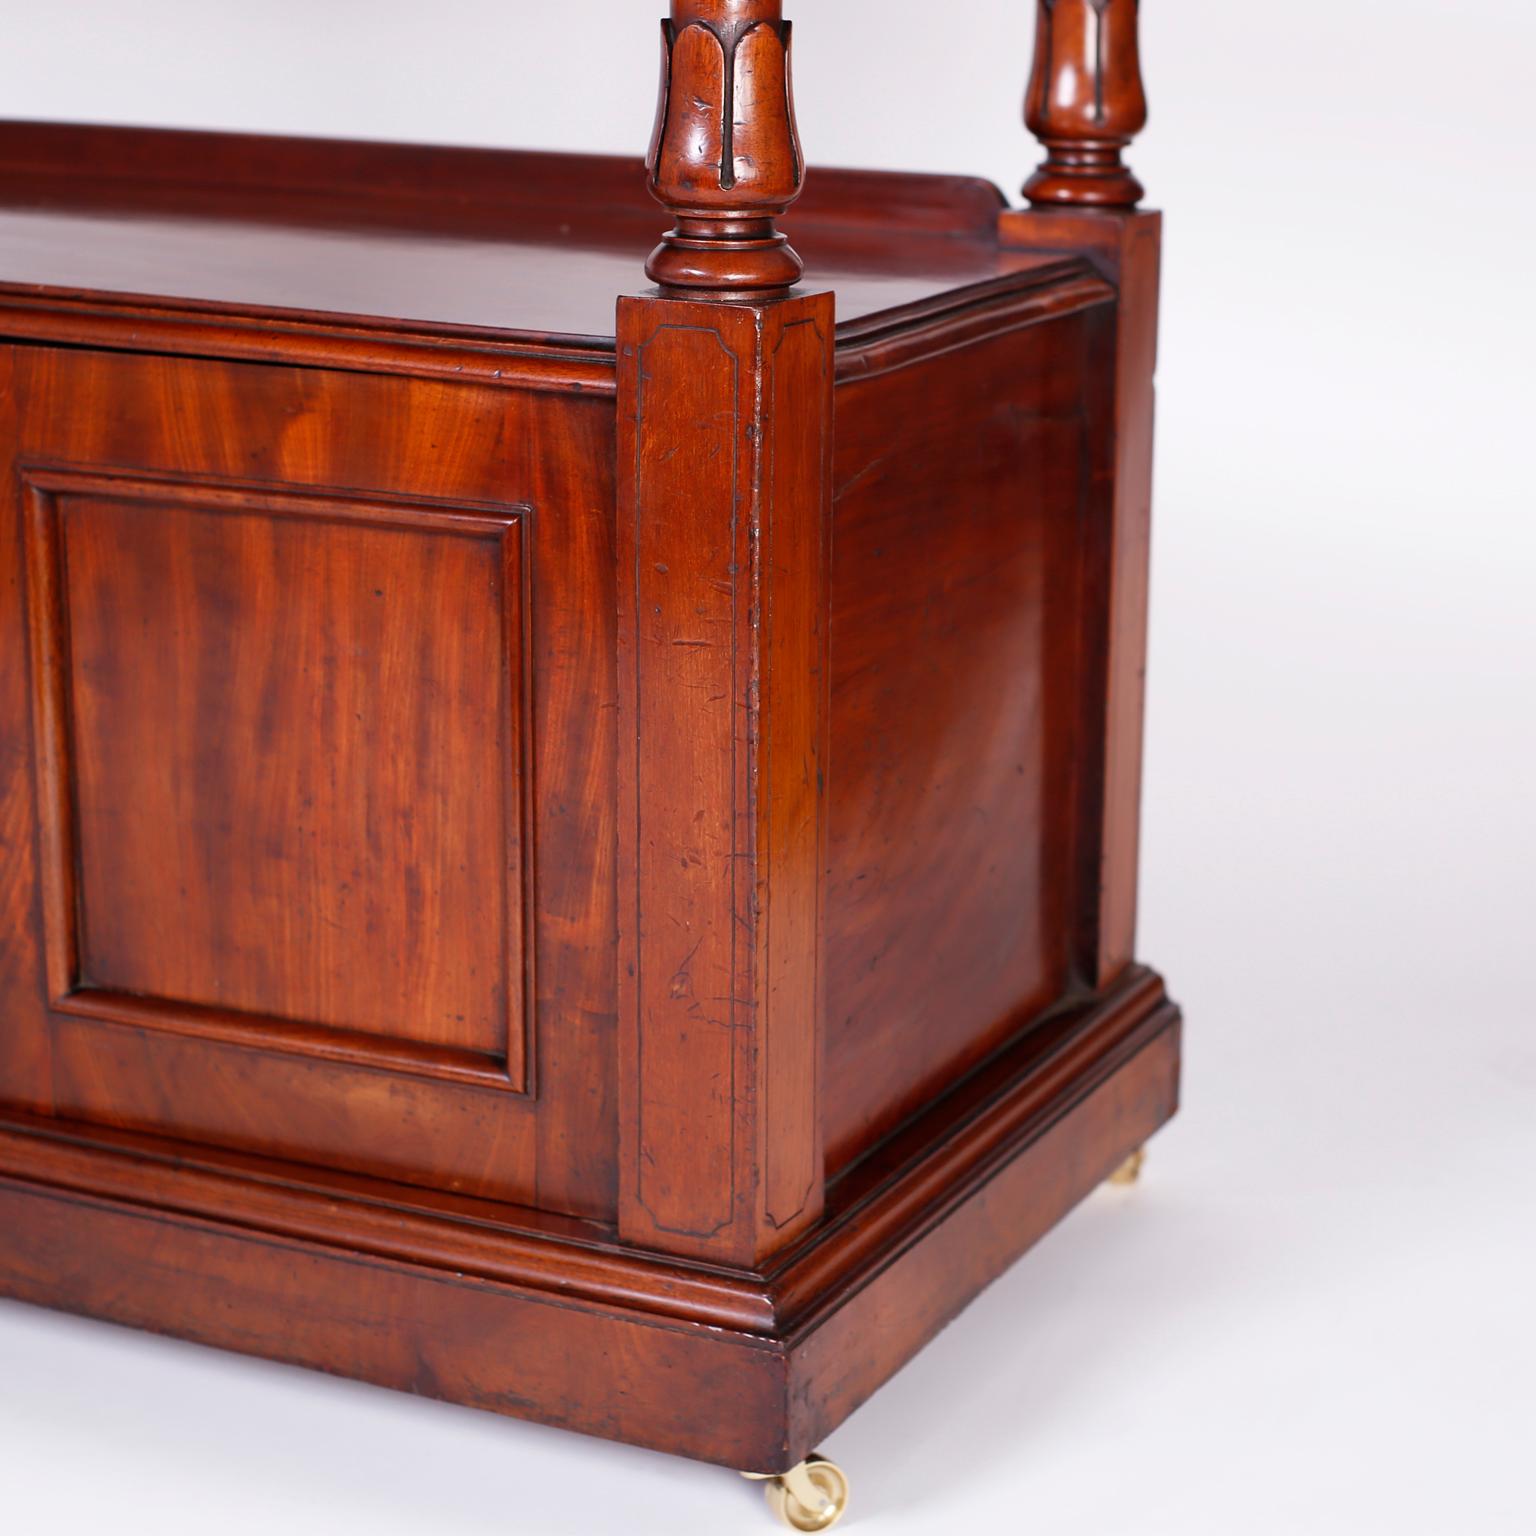 Mahogany Antique Étagère or Server with Cabinet For Sale